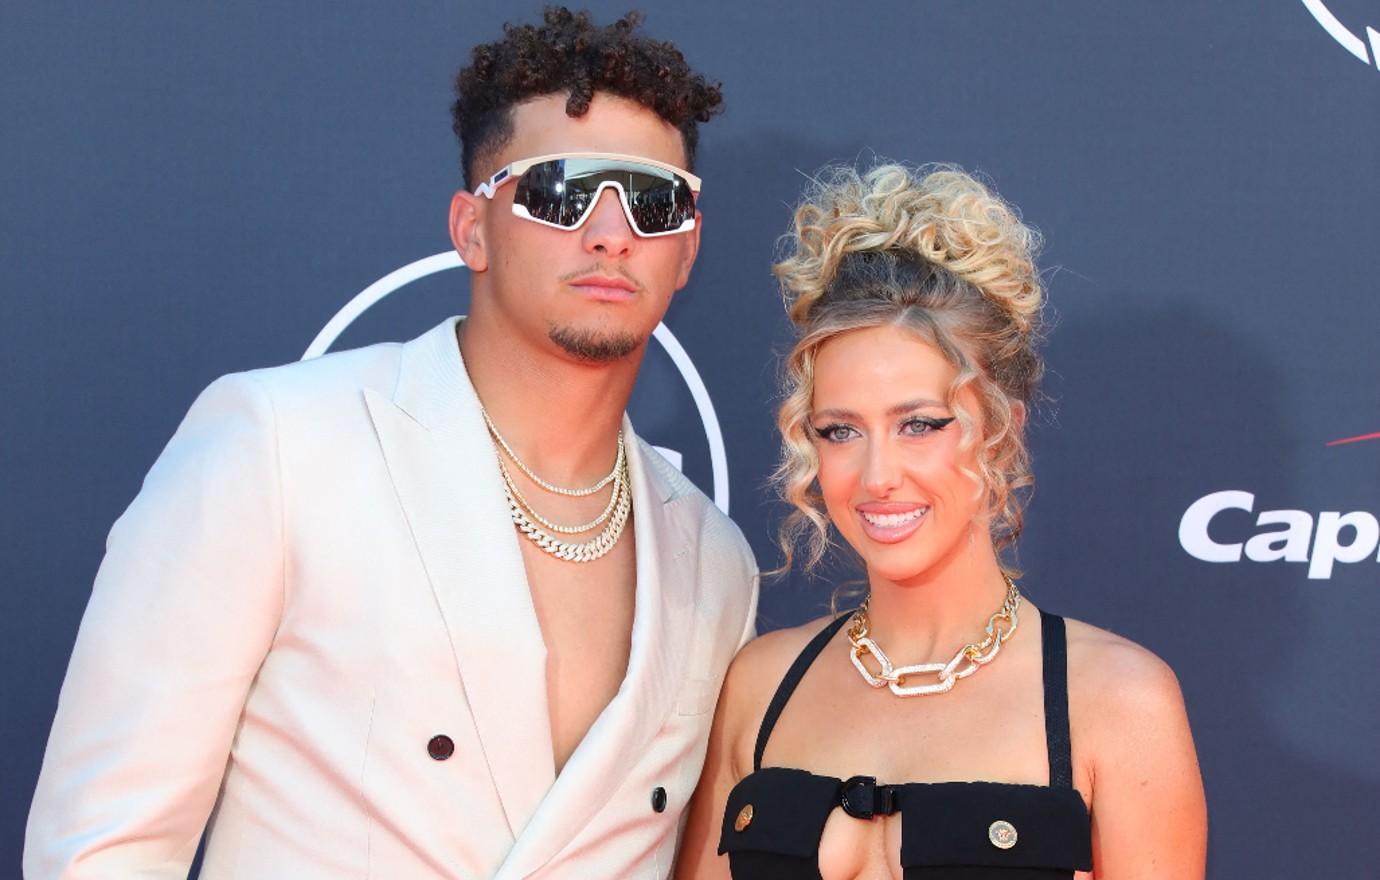 Patrick Mahomes' Mom Shuts Down Online Rumor About Her Son